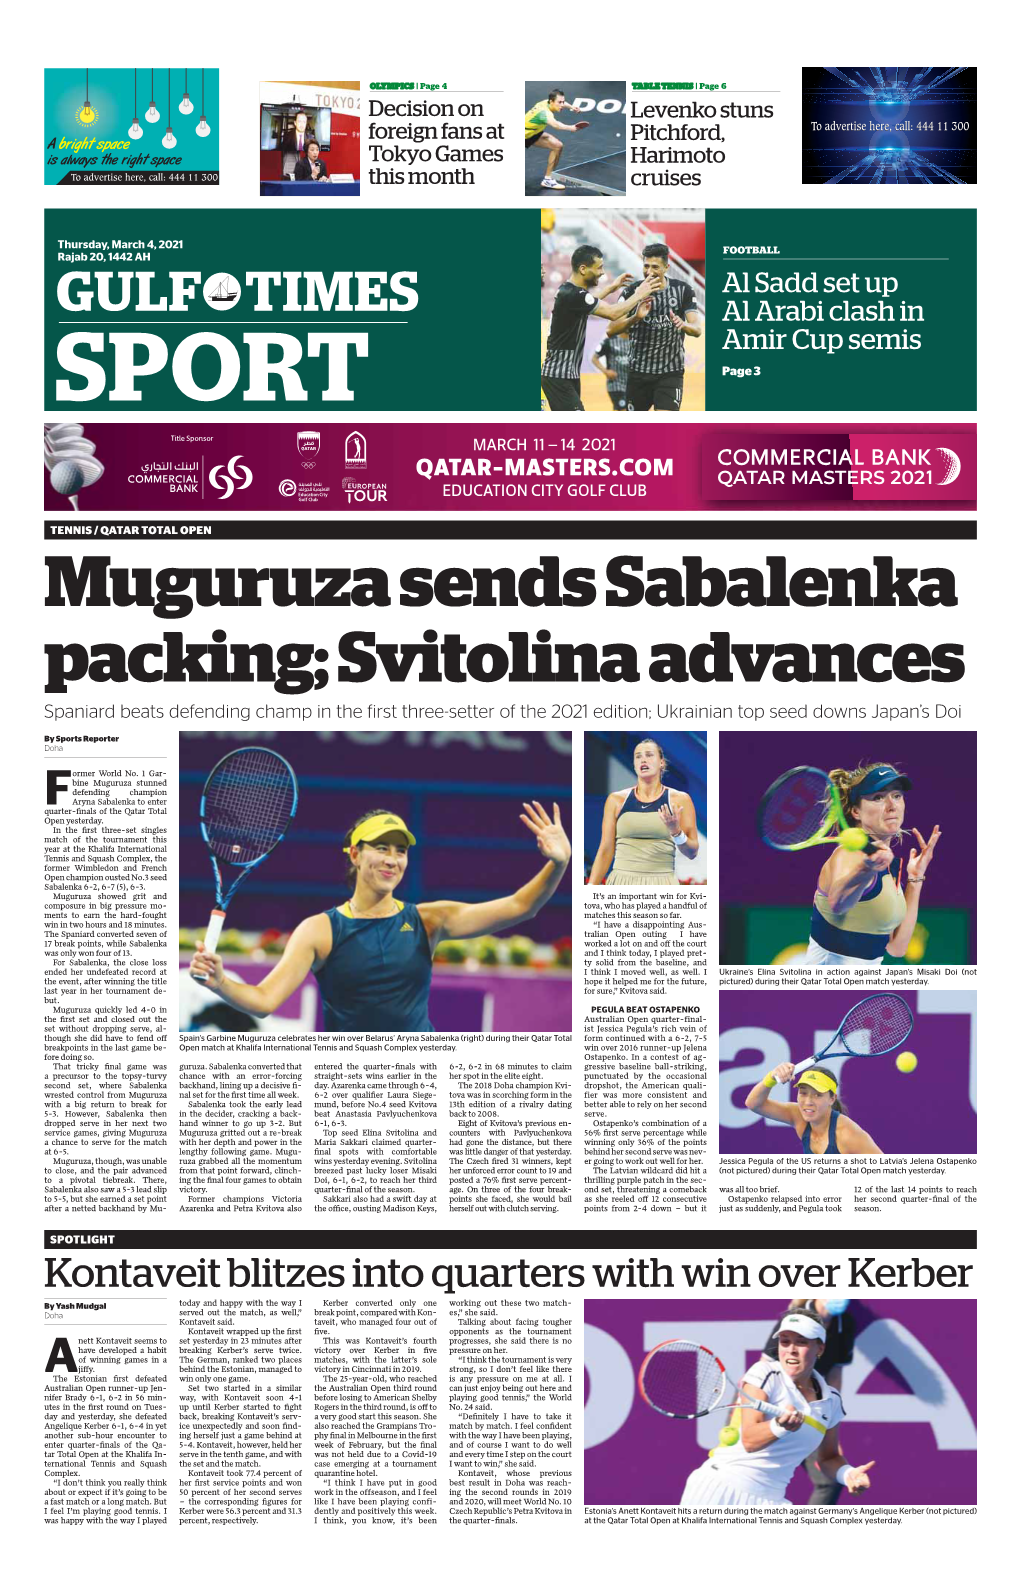 SPORT Page 3